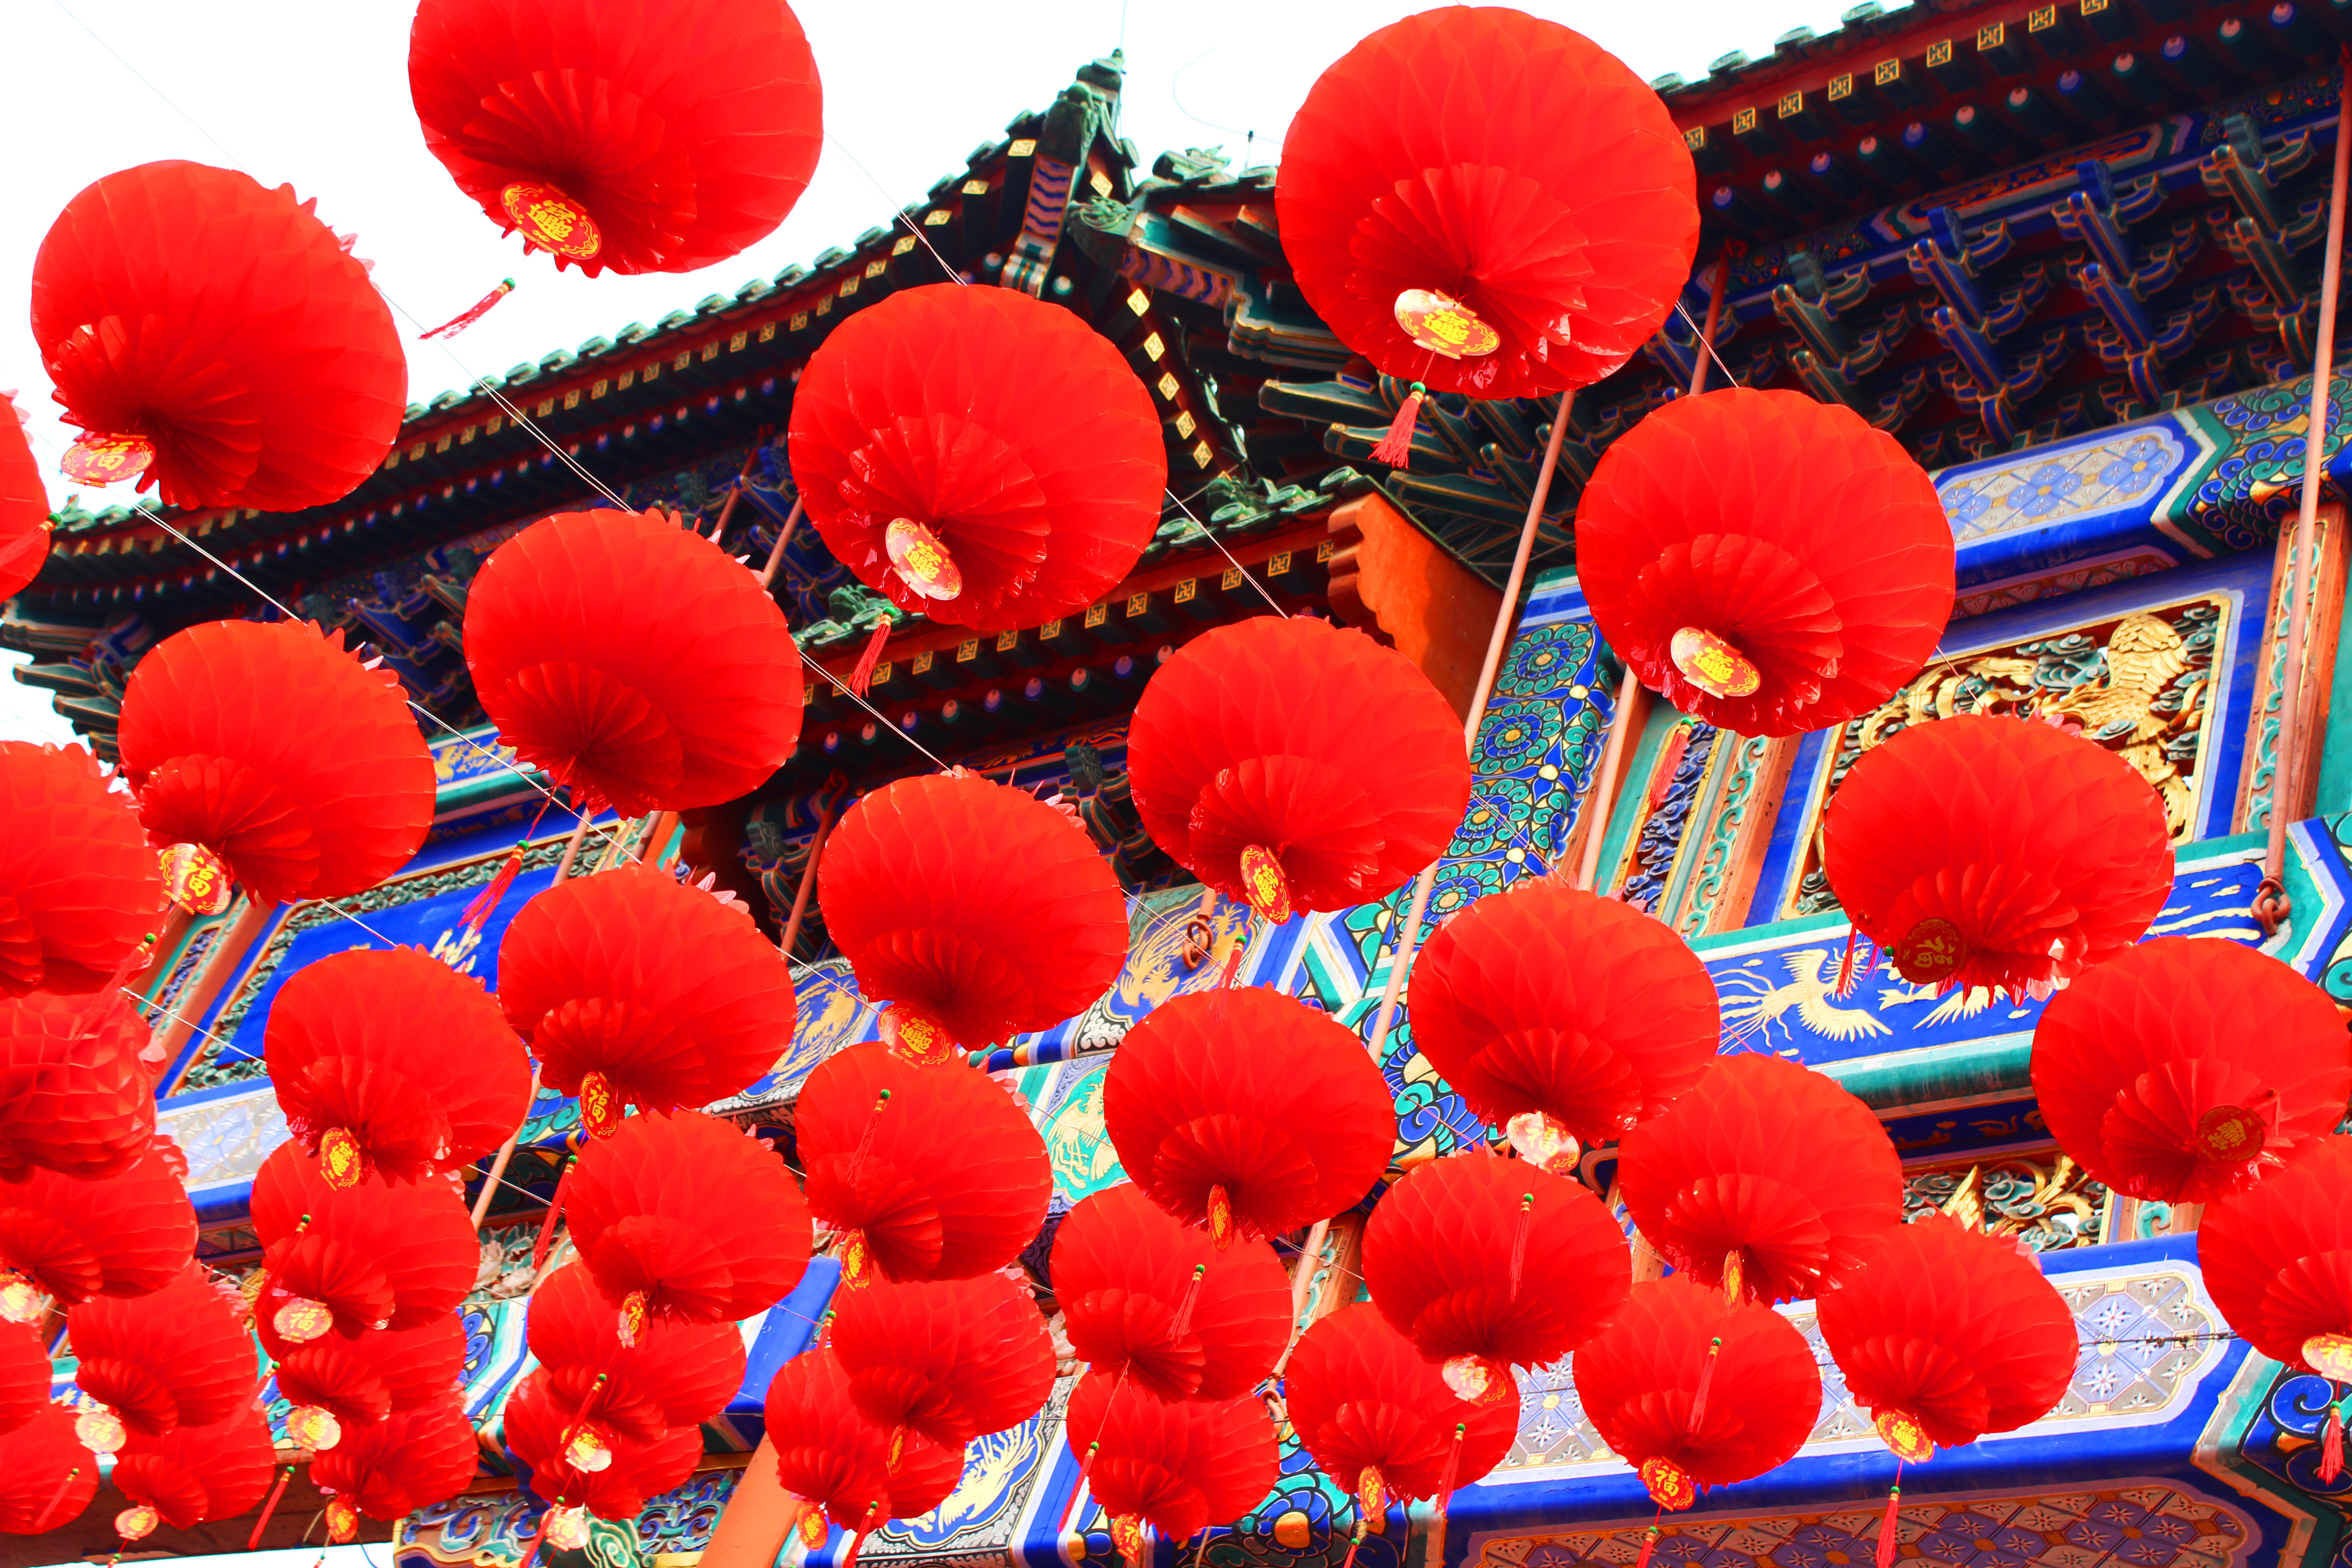 Red lanterns are hung everywhere during Chinese New Year celebrations.